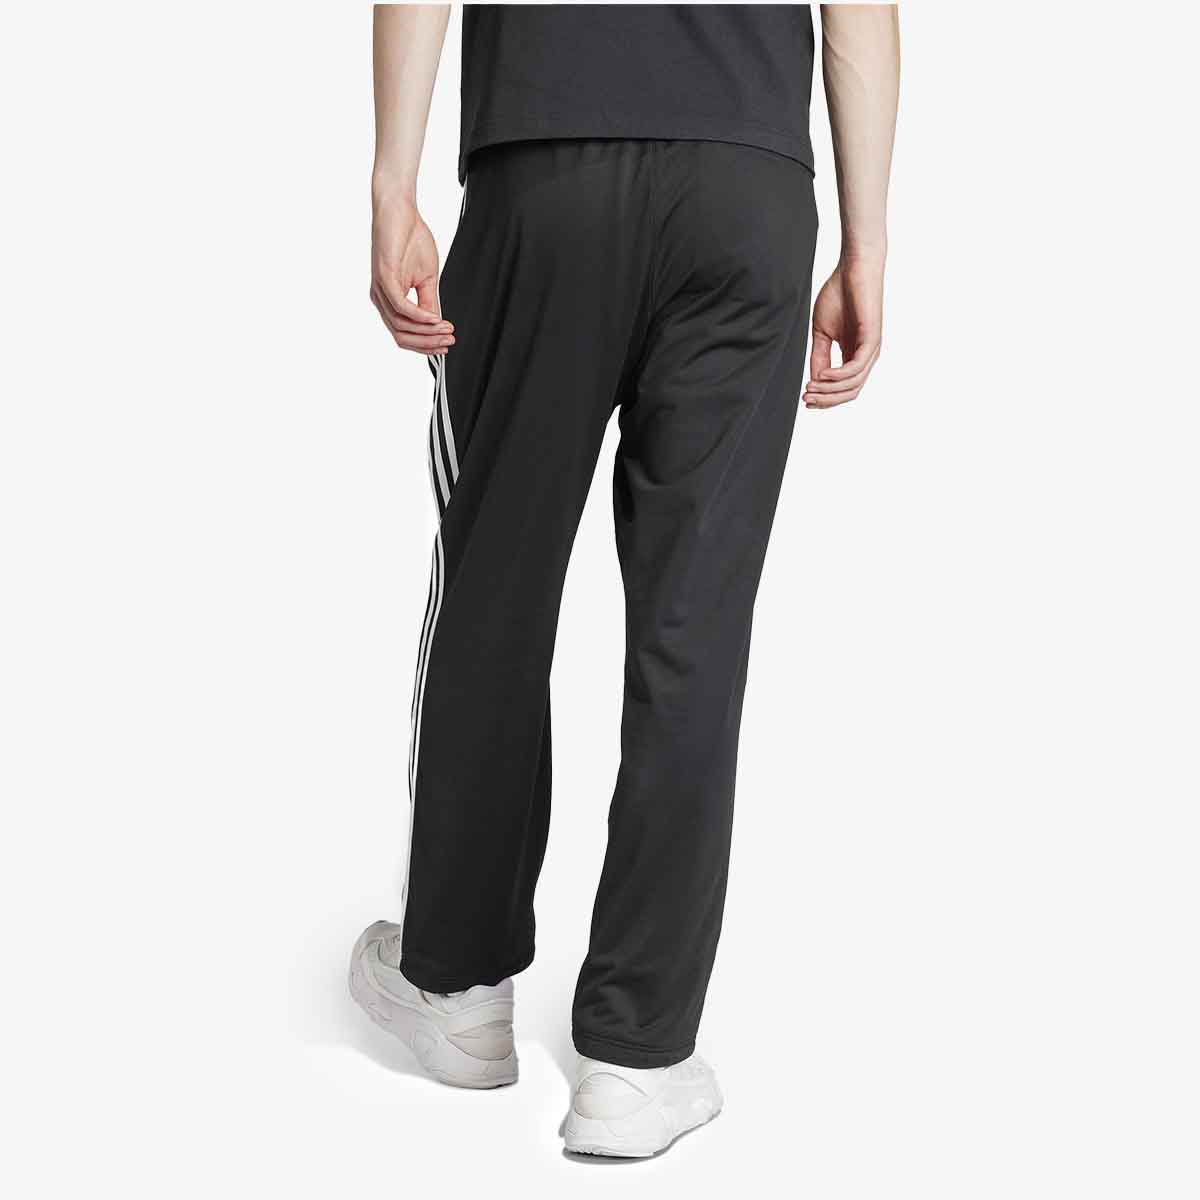 Adidas x KORN Track Pant (Black) | END. Launches